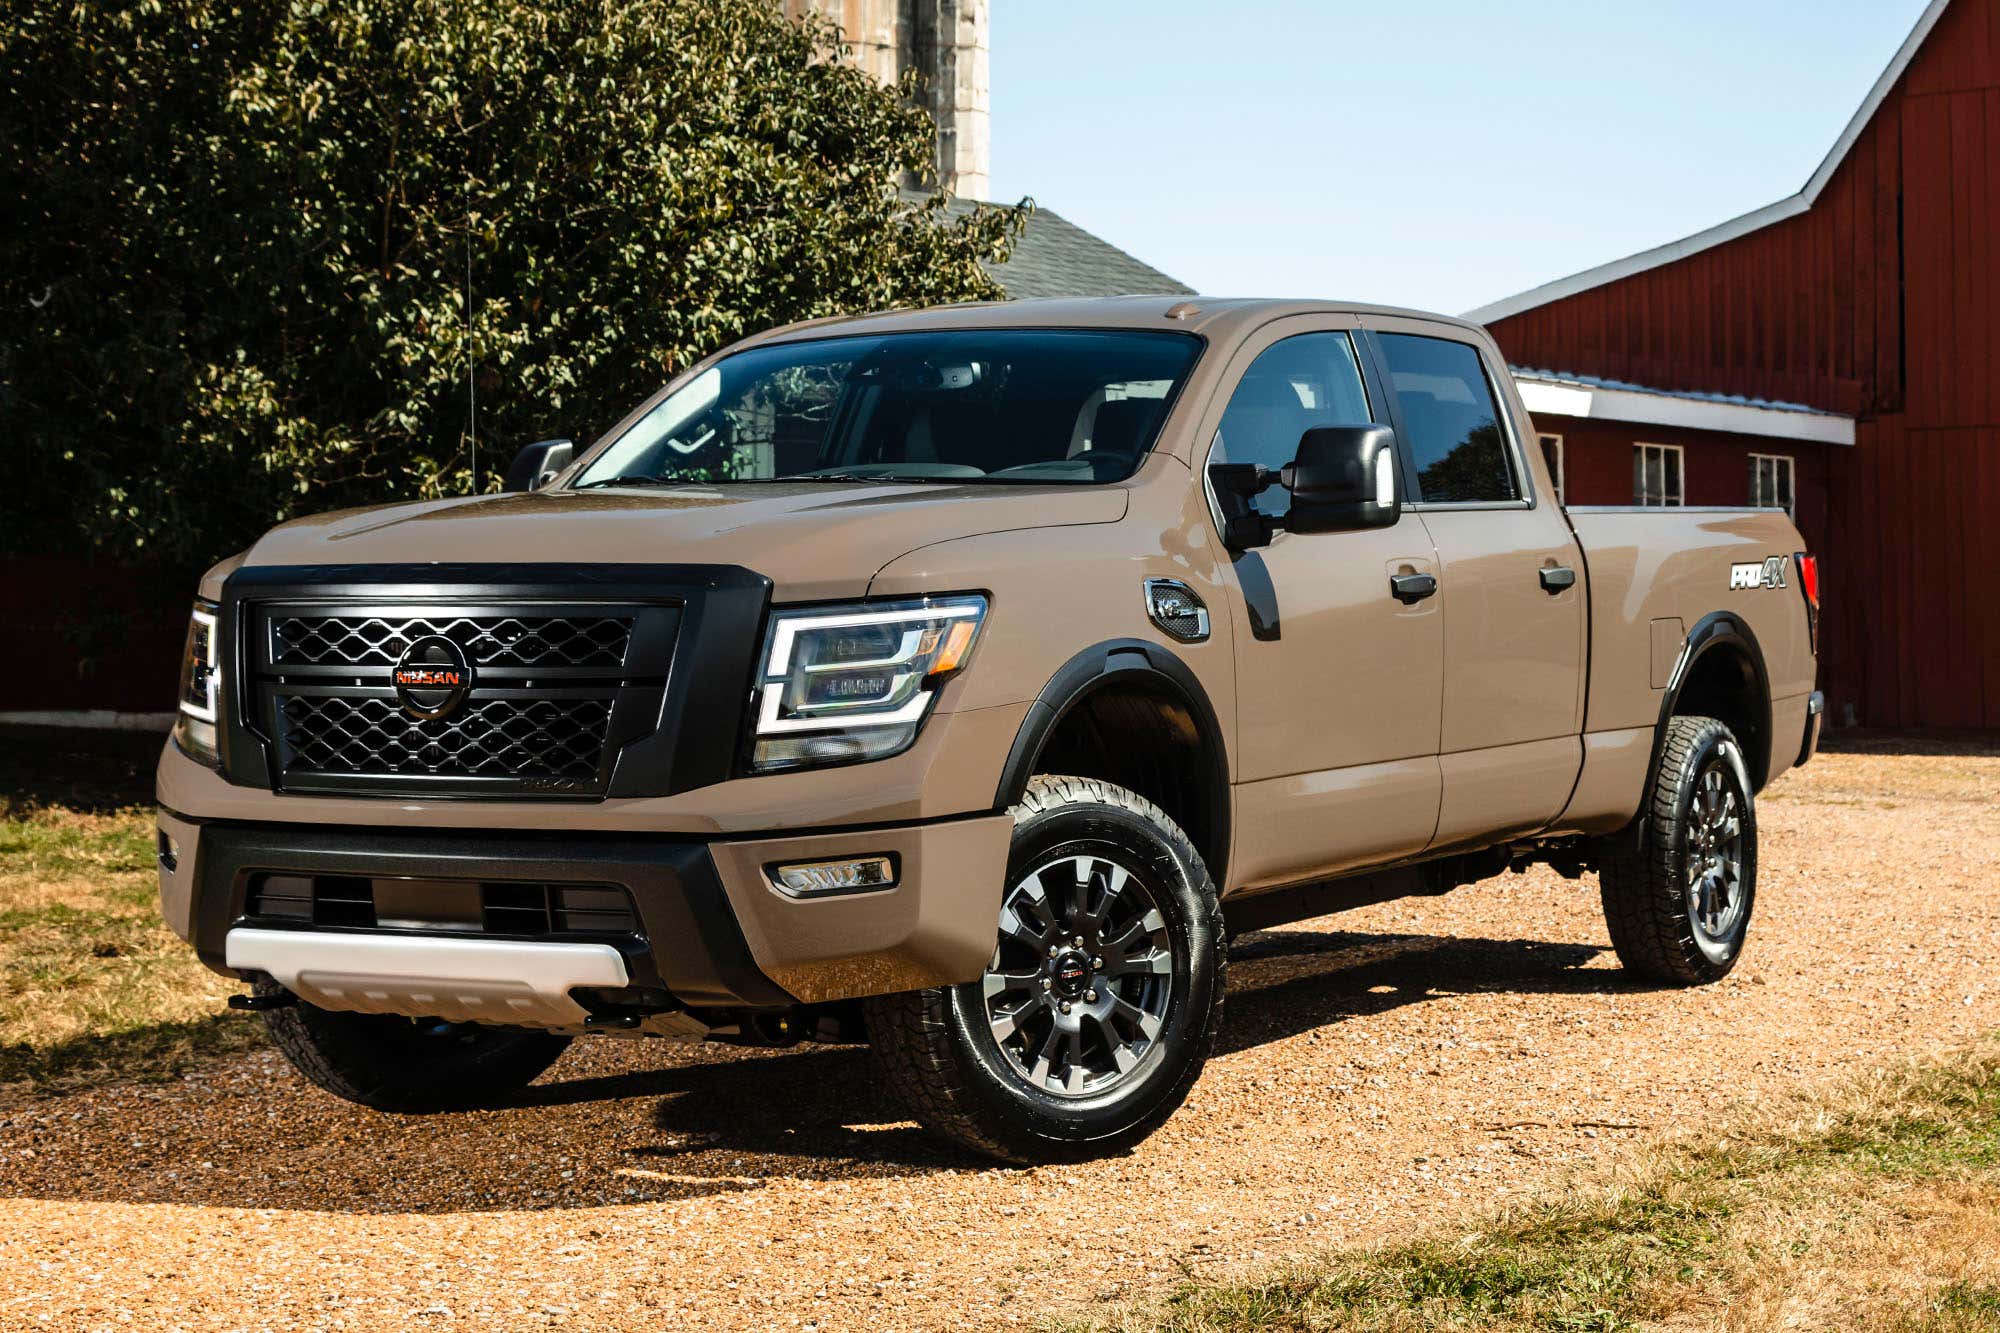 2020 Nissan Titan XD Review: The Full-Size Truck Nissan Should've Built